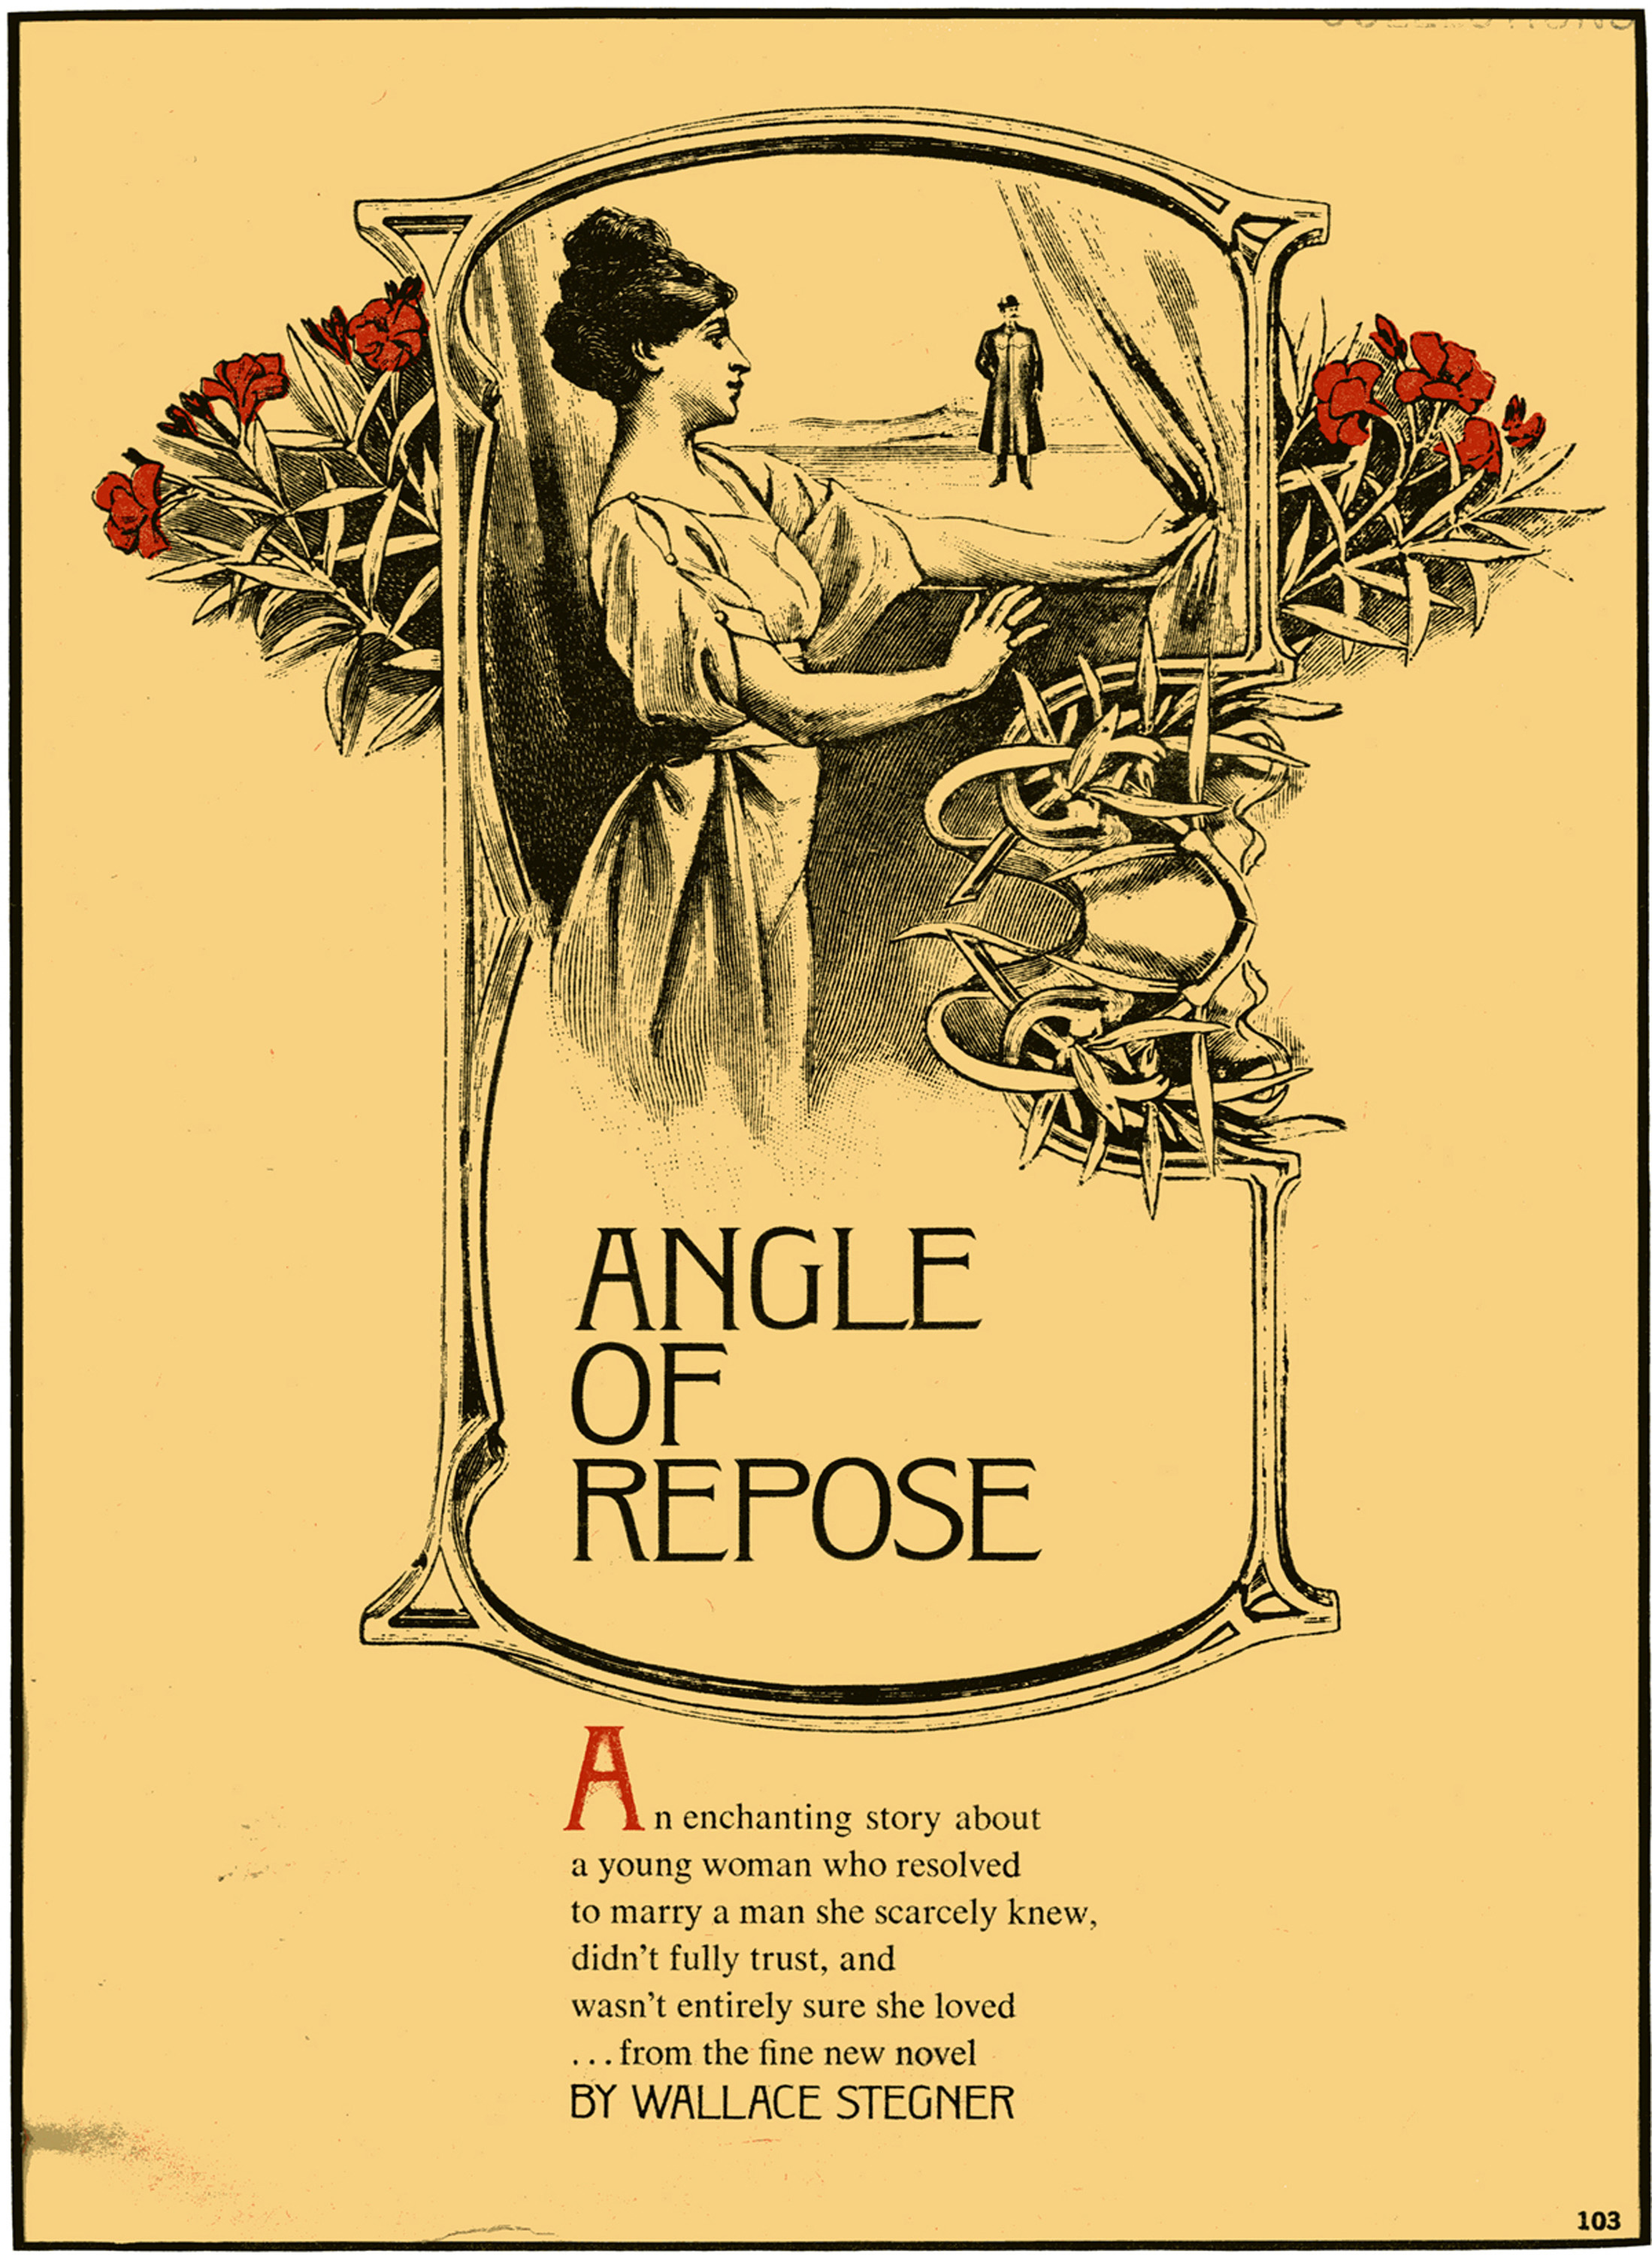 An advertisement for Angle of Repose